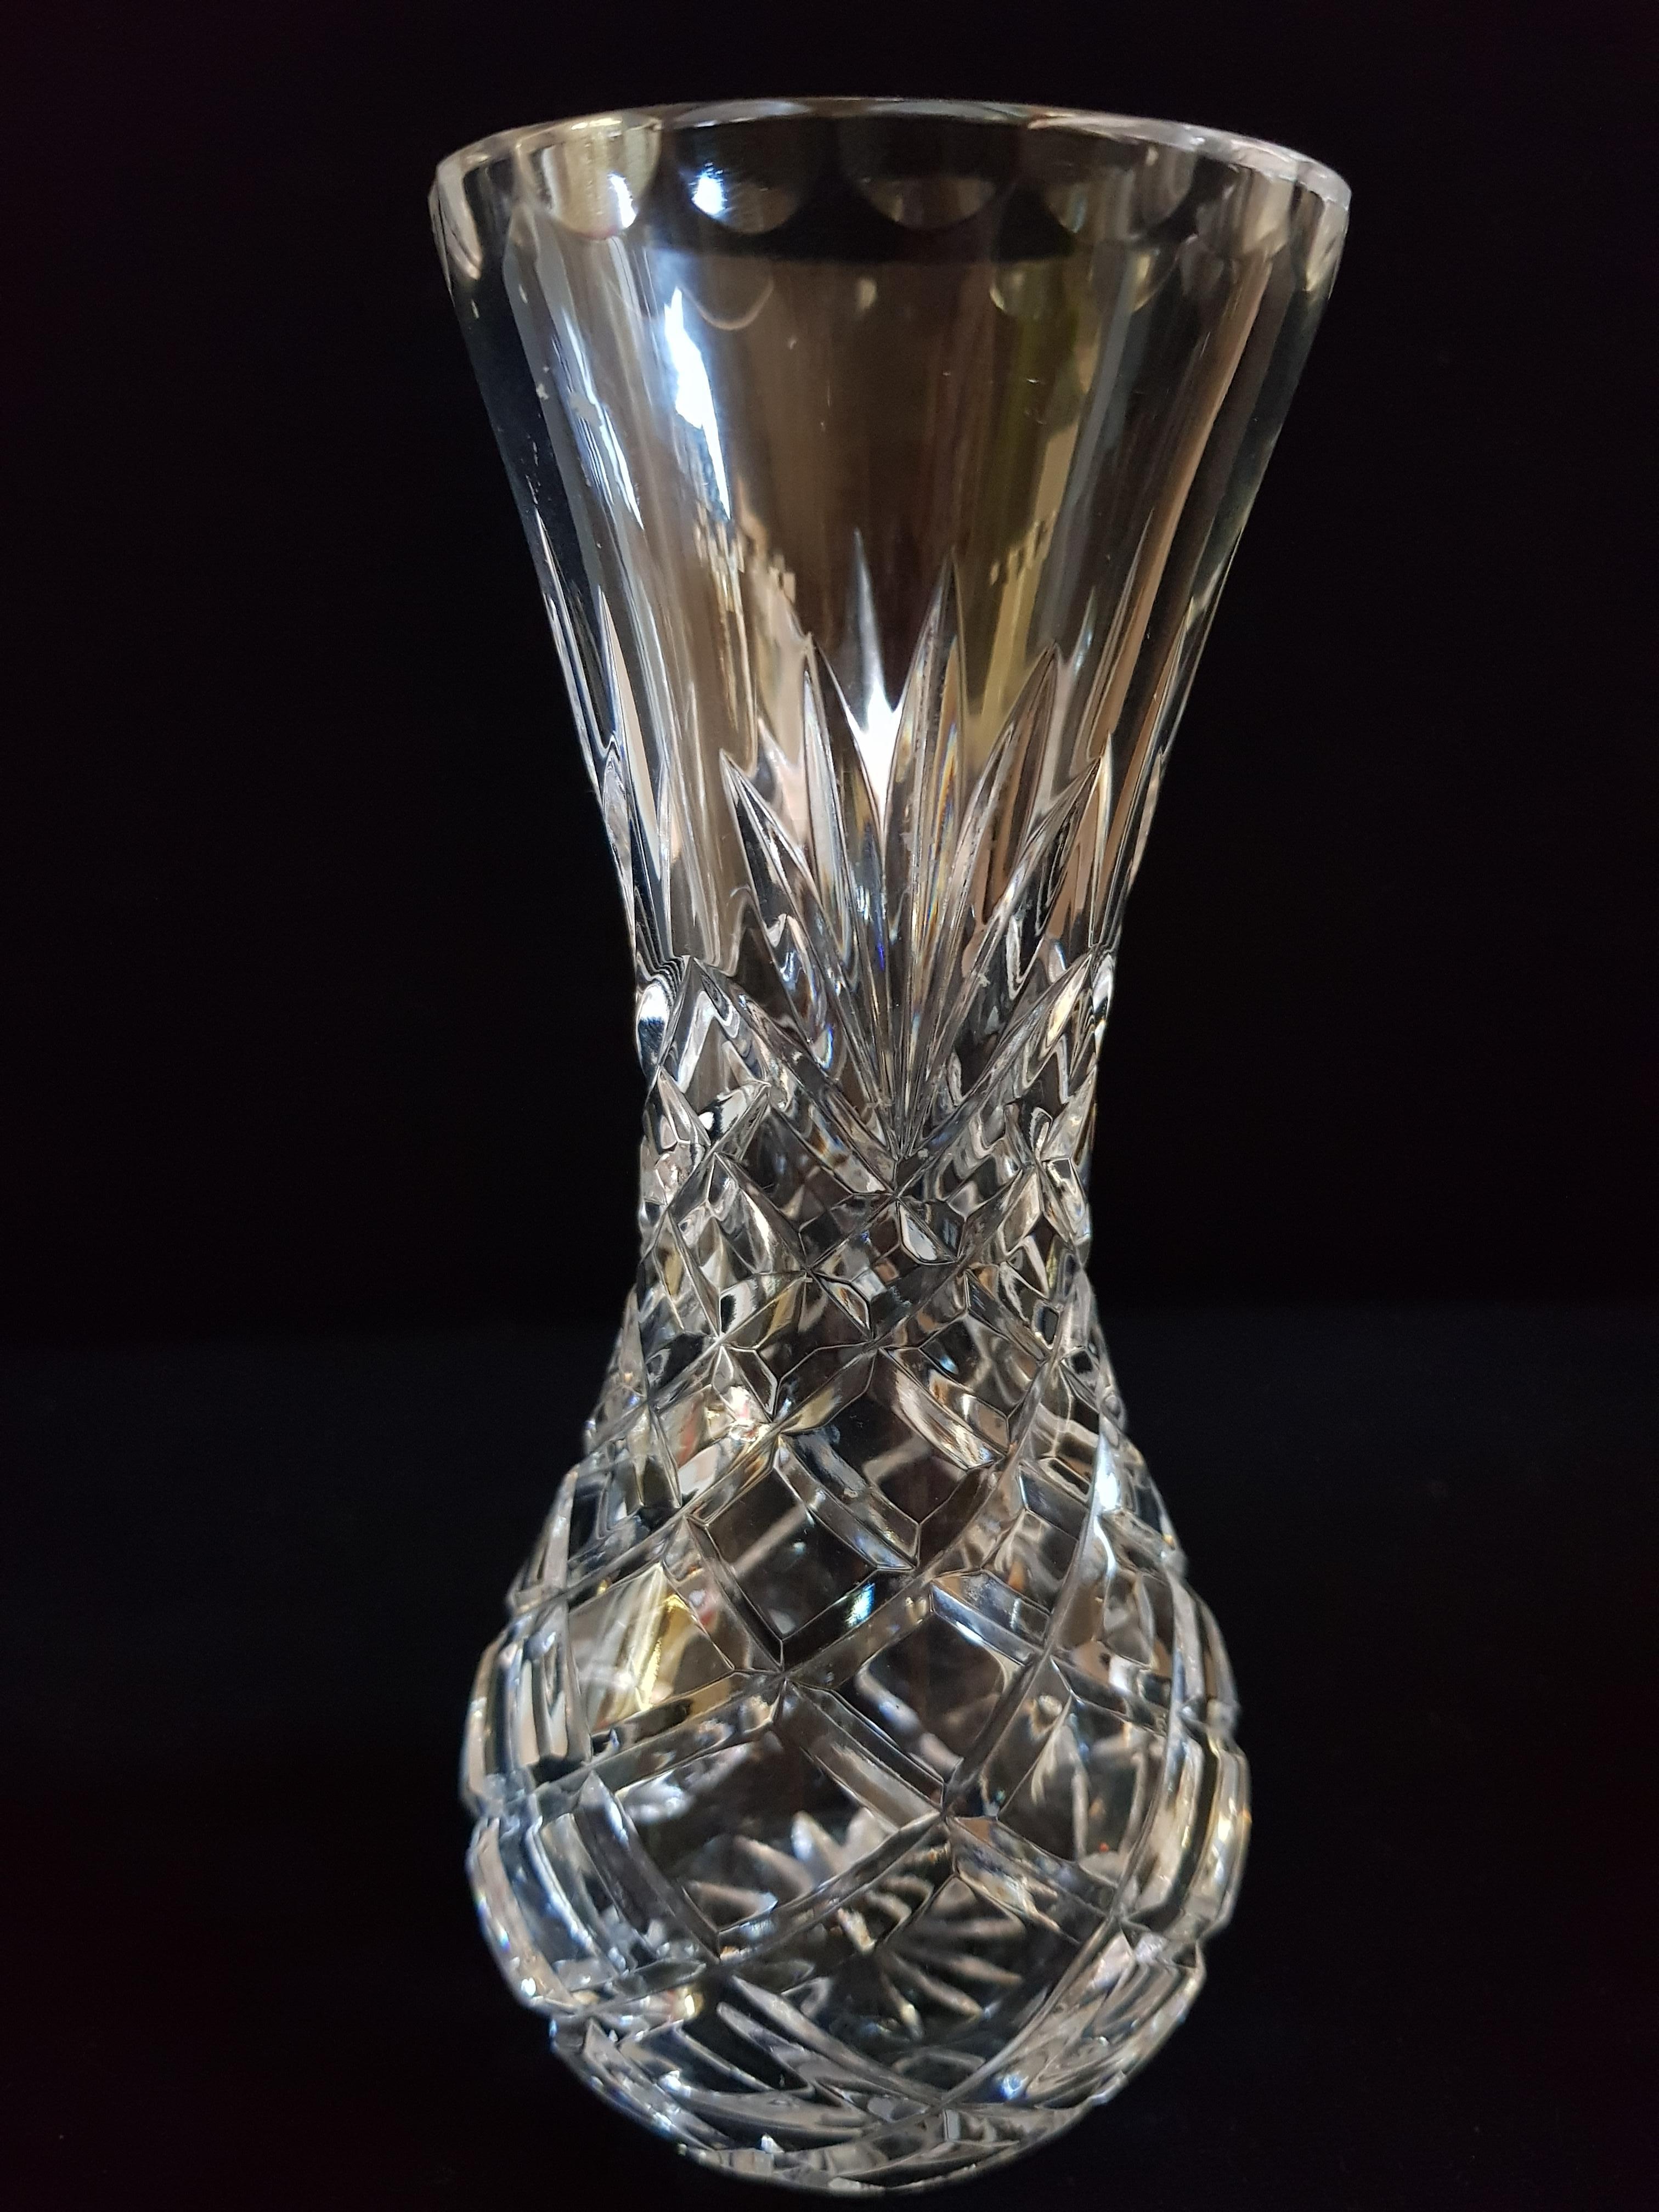 Vitange Bohemian Hand Cut Crystal Vases In Excellent Condition For Sale In Grantham, GB